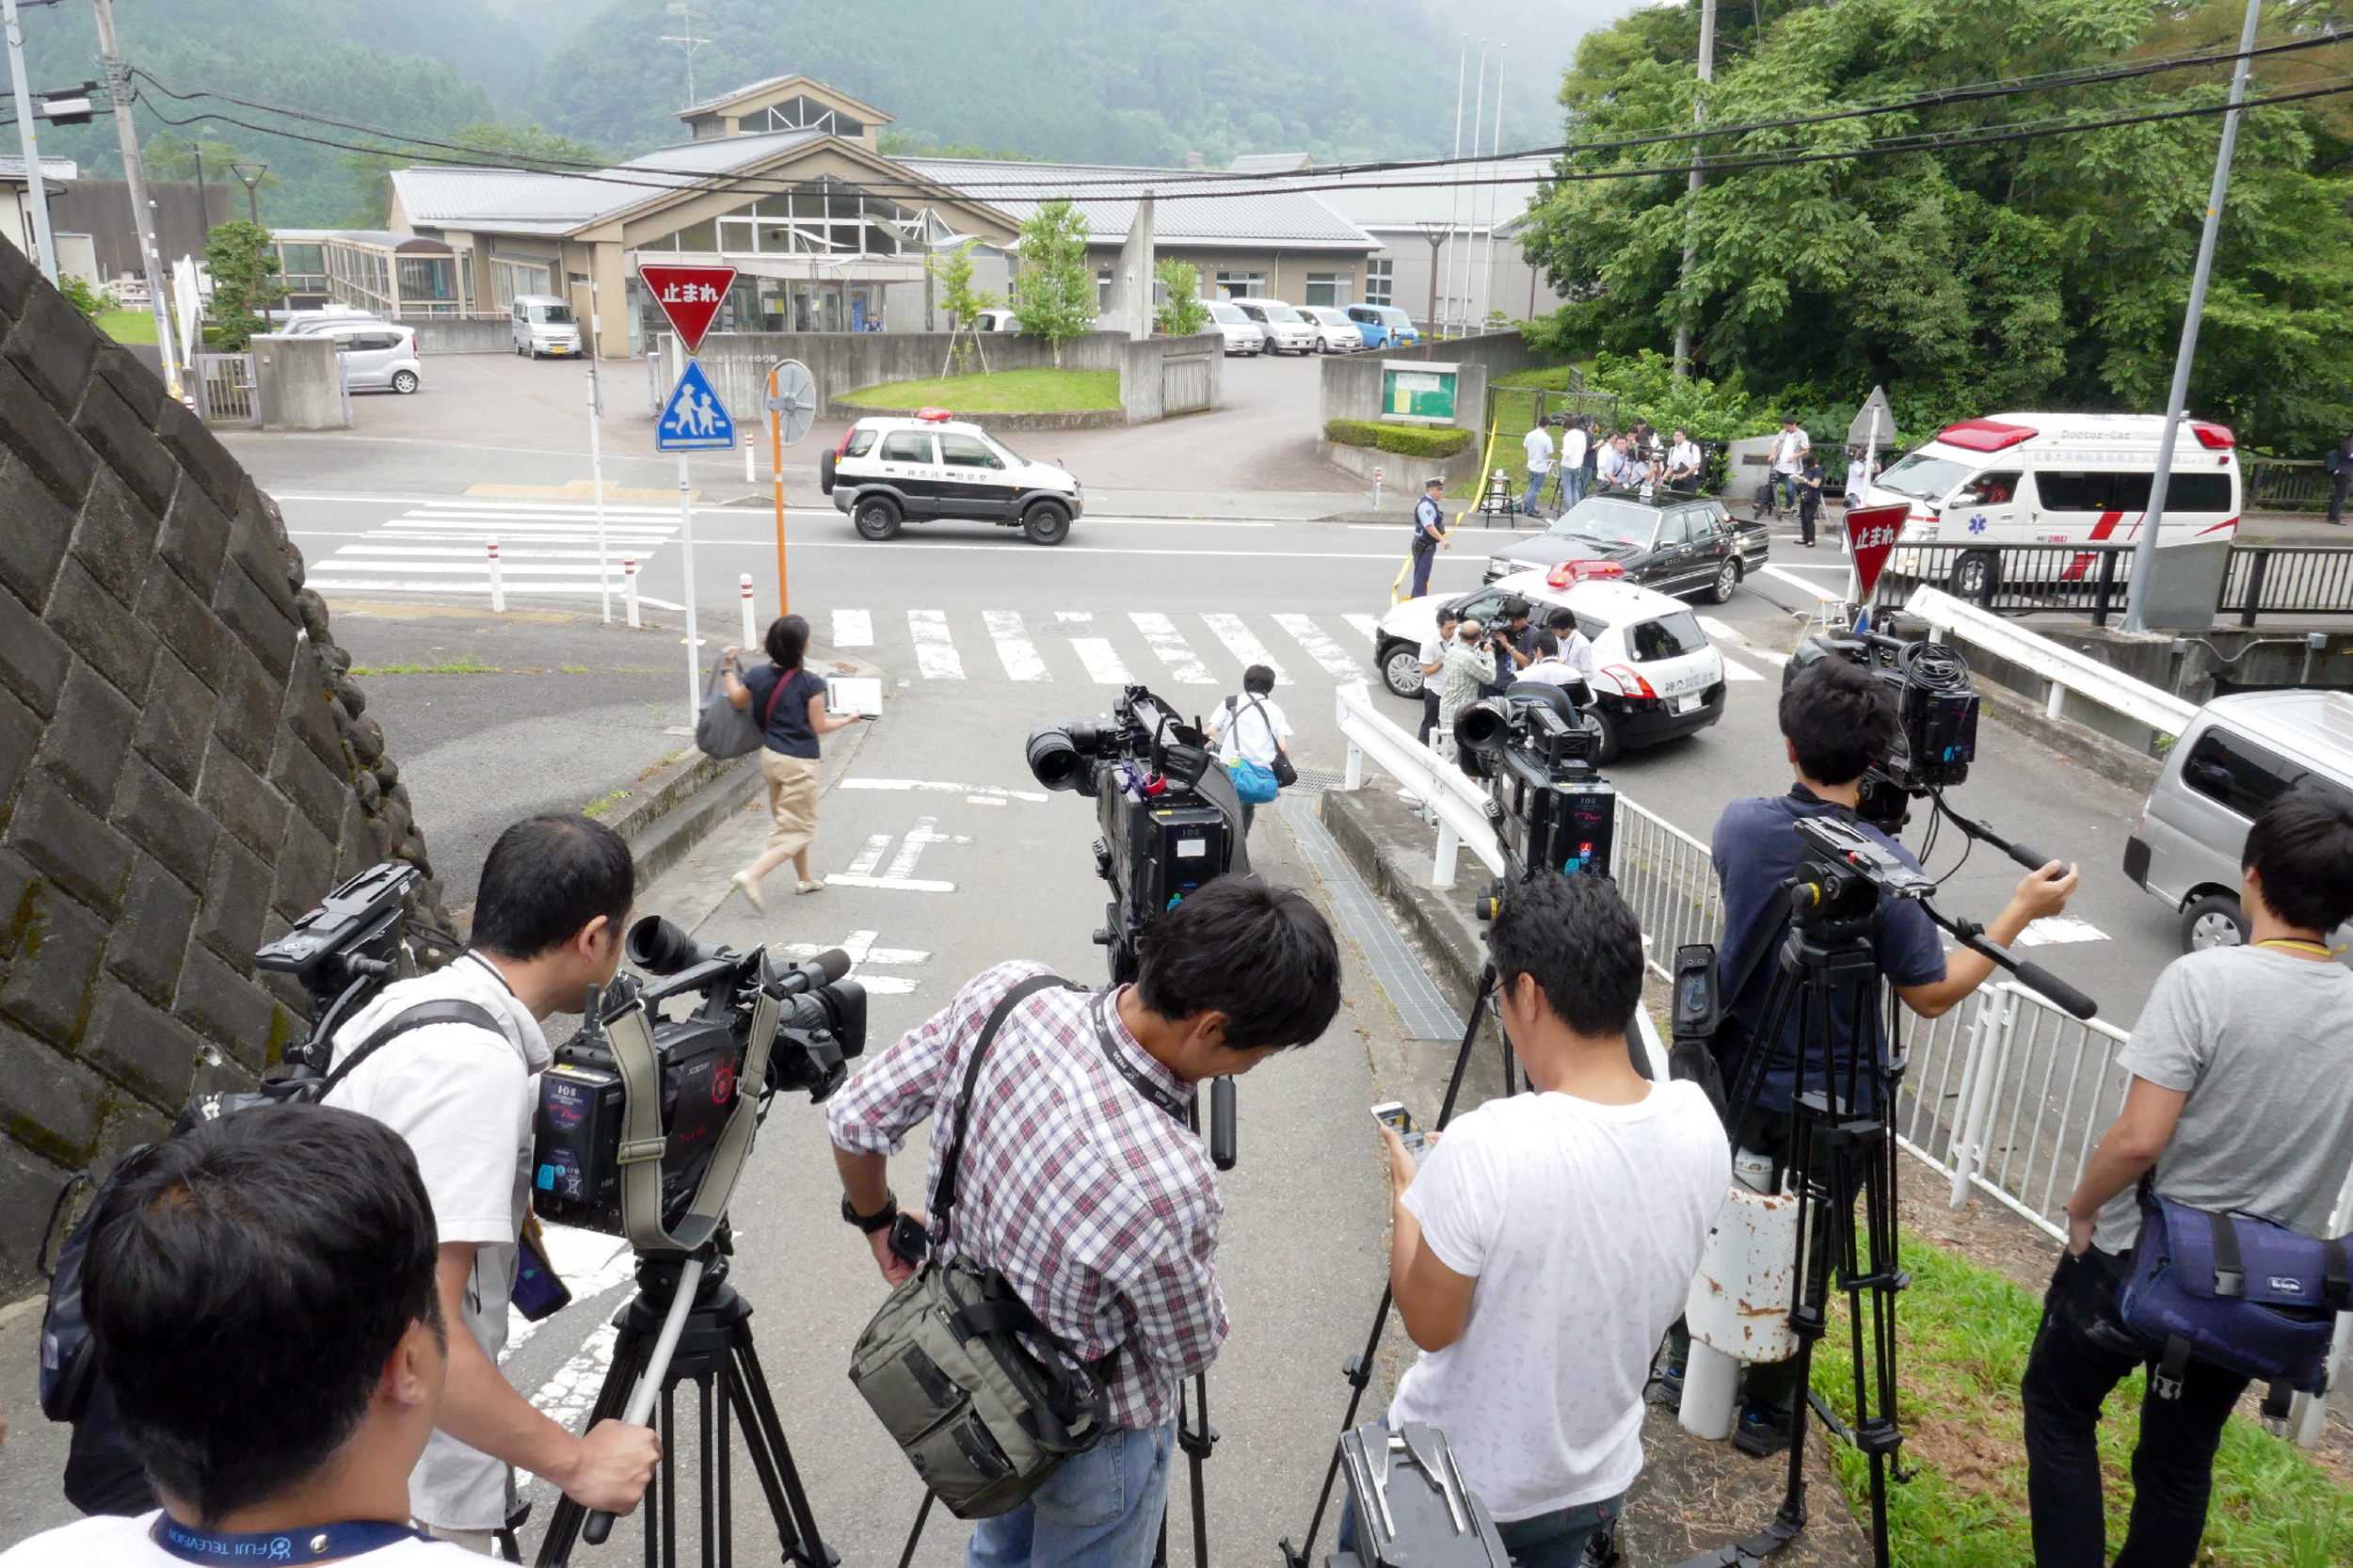 Journalists await near the Tsukui Yamayuri En, a care centre at Sagamihara city, Kanagawa prefecture on July 26, 2016. ==JAPAN OUT== Some 15 people died and 45 were injured at the care centre for the disabled in Japan early July 26 when a man claiming to be an ex-employee of the facility went on a rampage with a knife. == JAPAN OUT == / AFP PHOTO / JIJI PRESS / JIJI PRESS